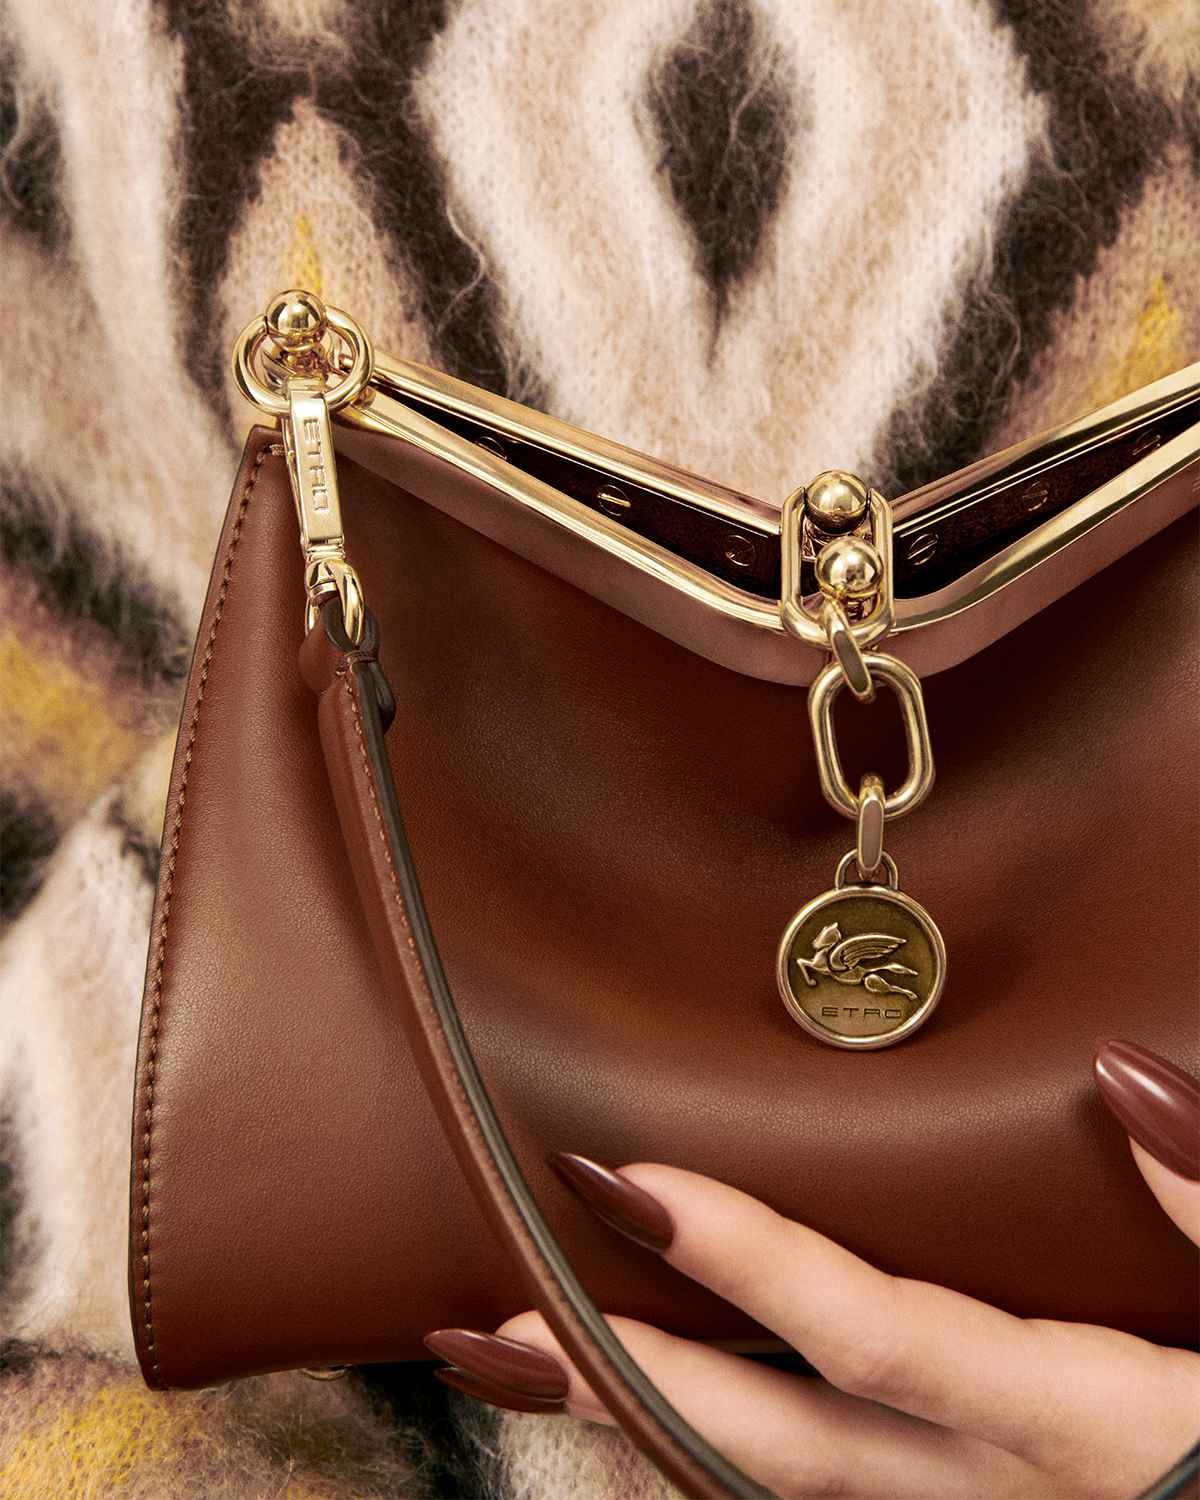 Etro Launches The Vela Bag With Sultry Campaign